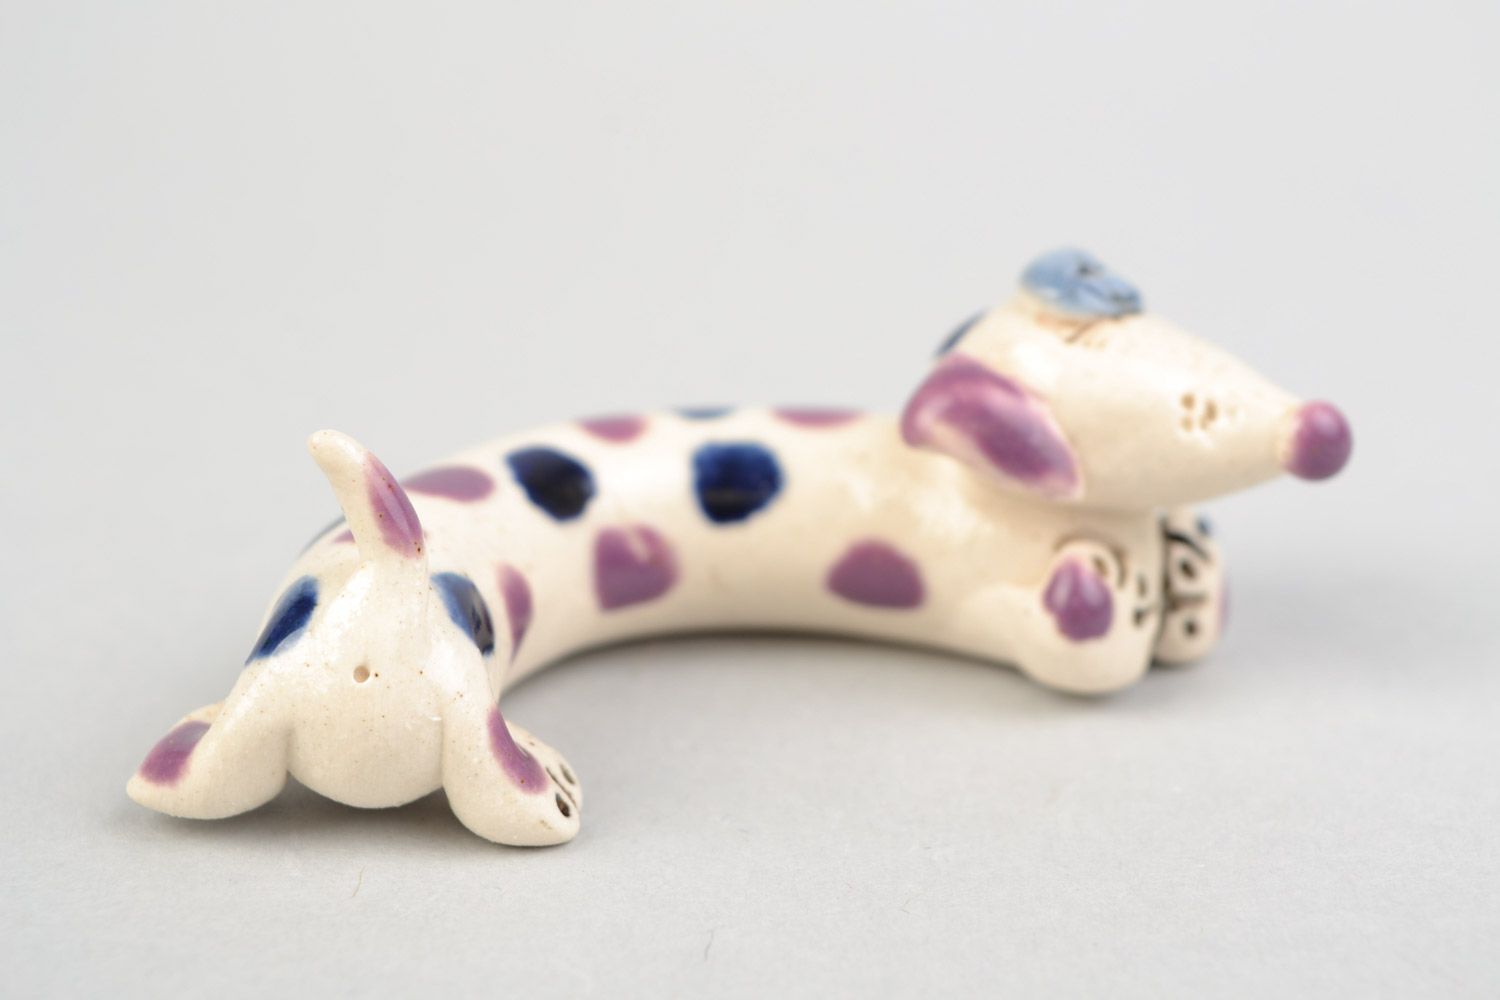 Clay handmade figurine dachshund dog colored with glaze painted with spots photo 5